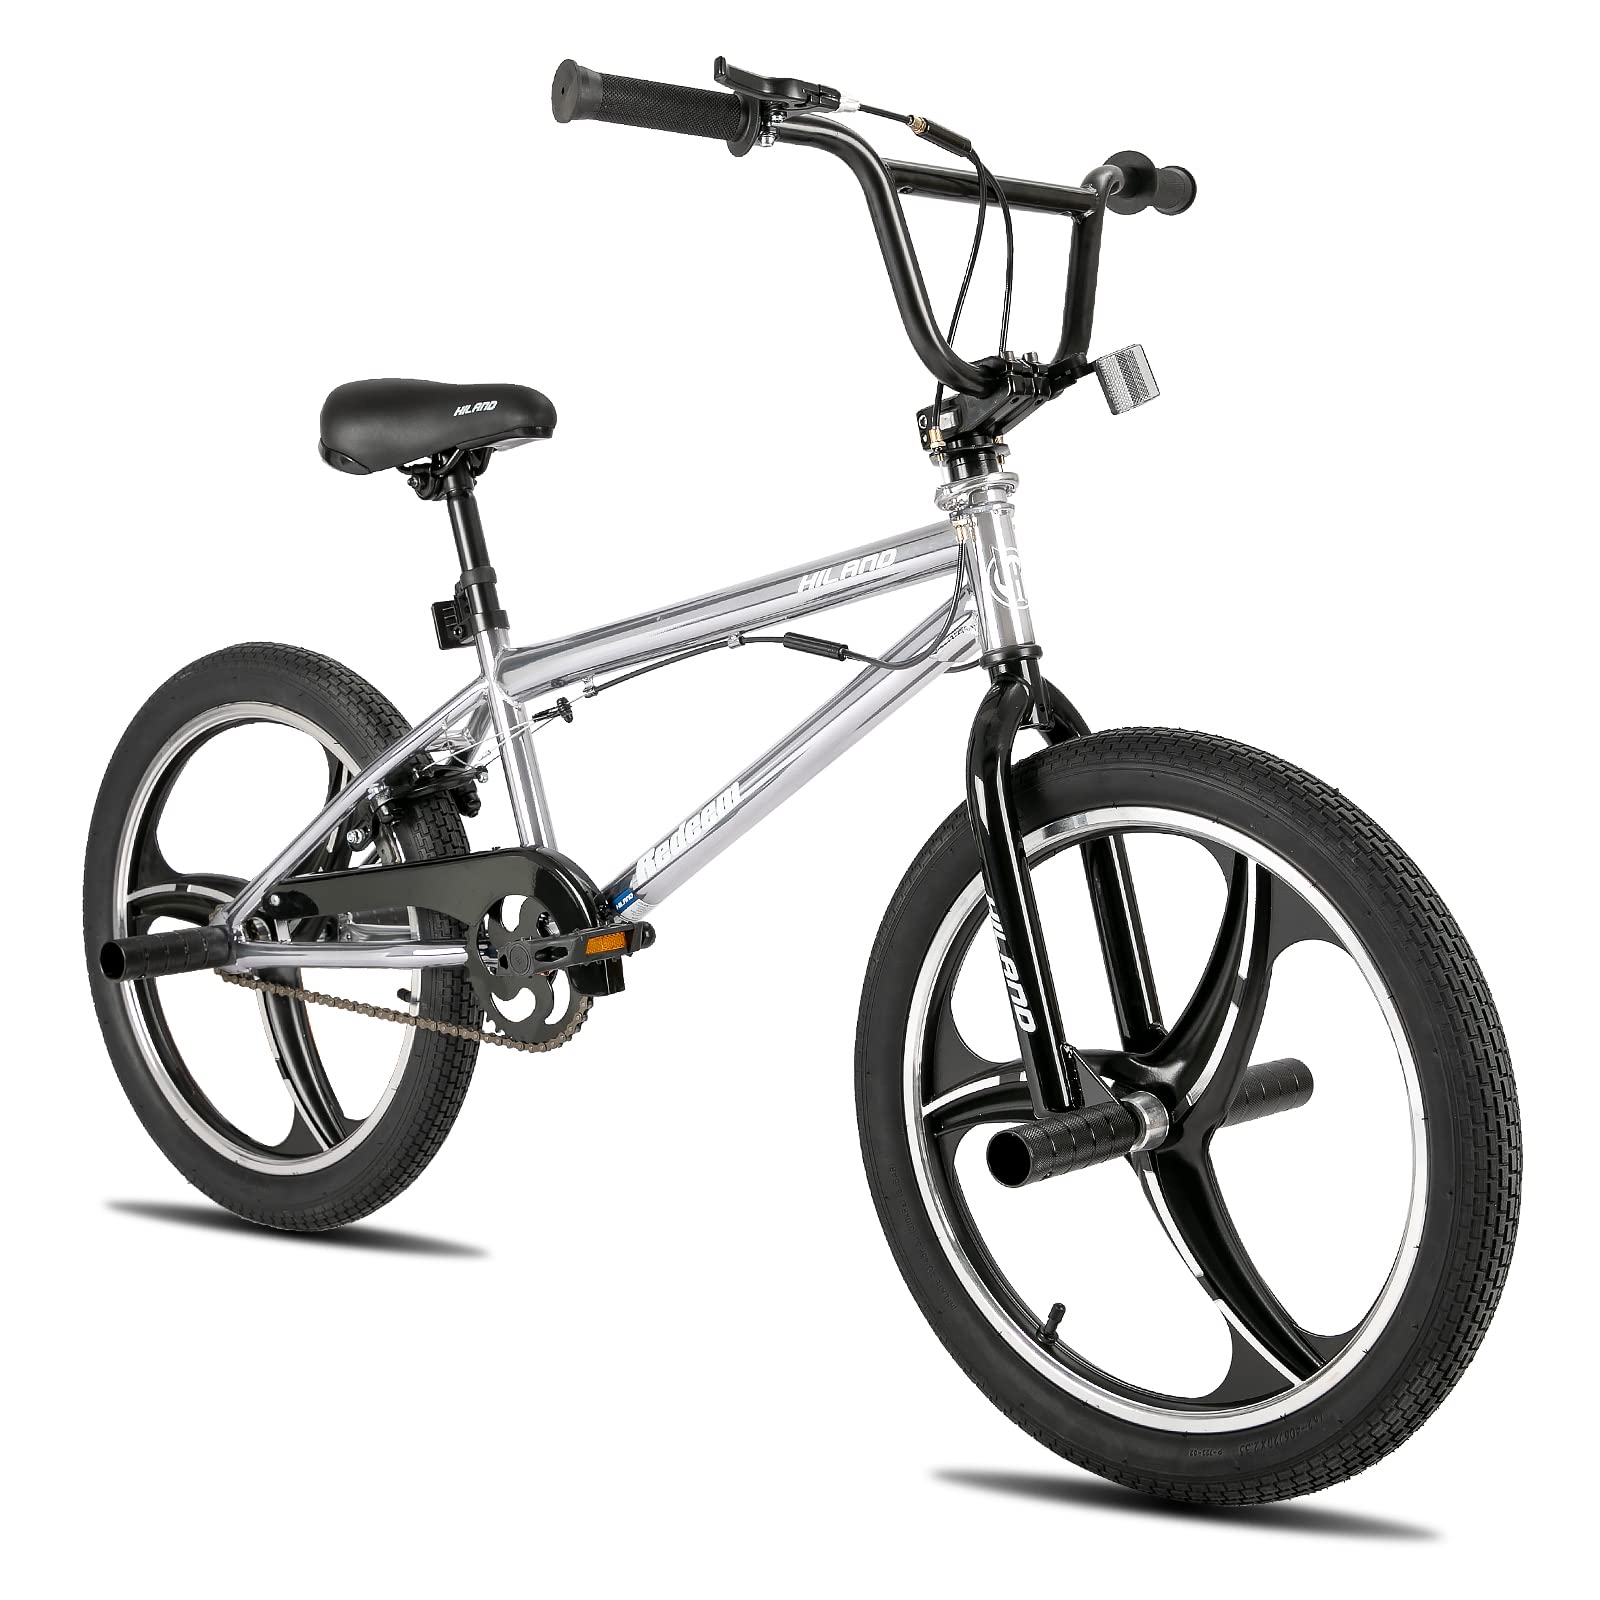 selection of BMX bikes in different colors and styles